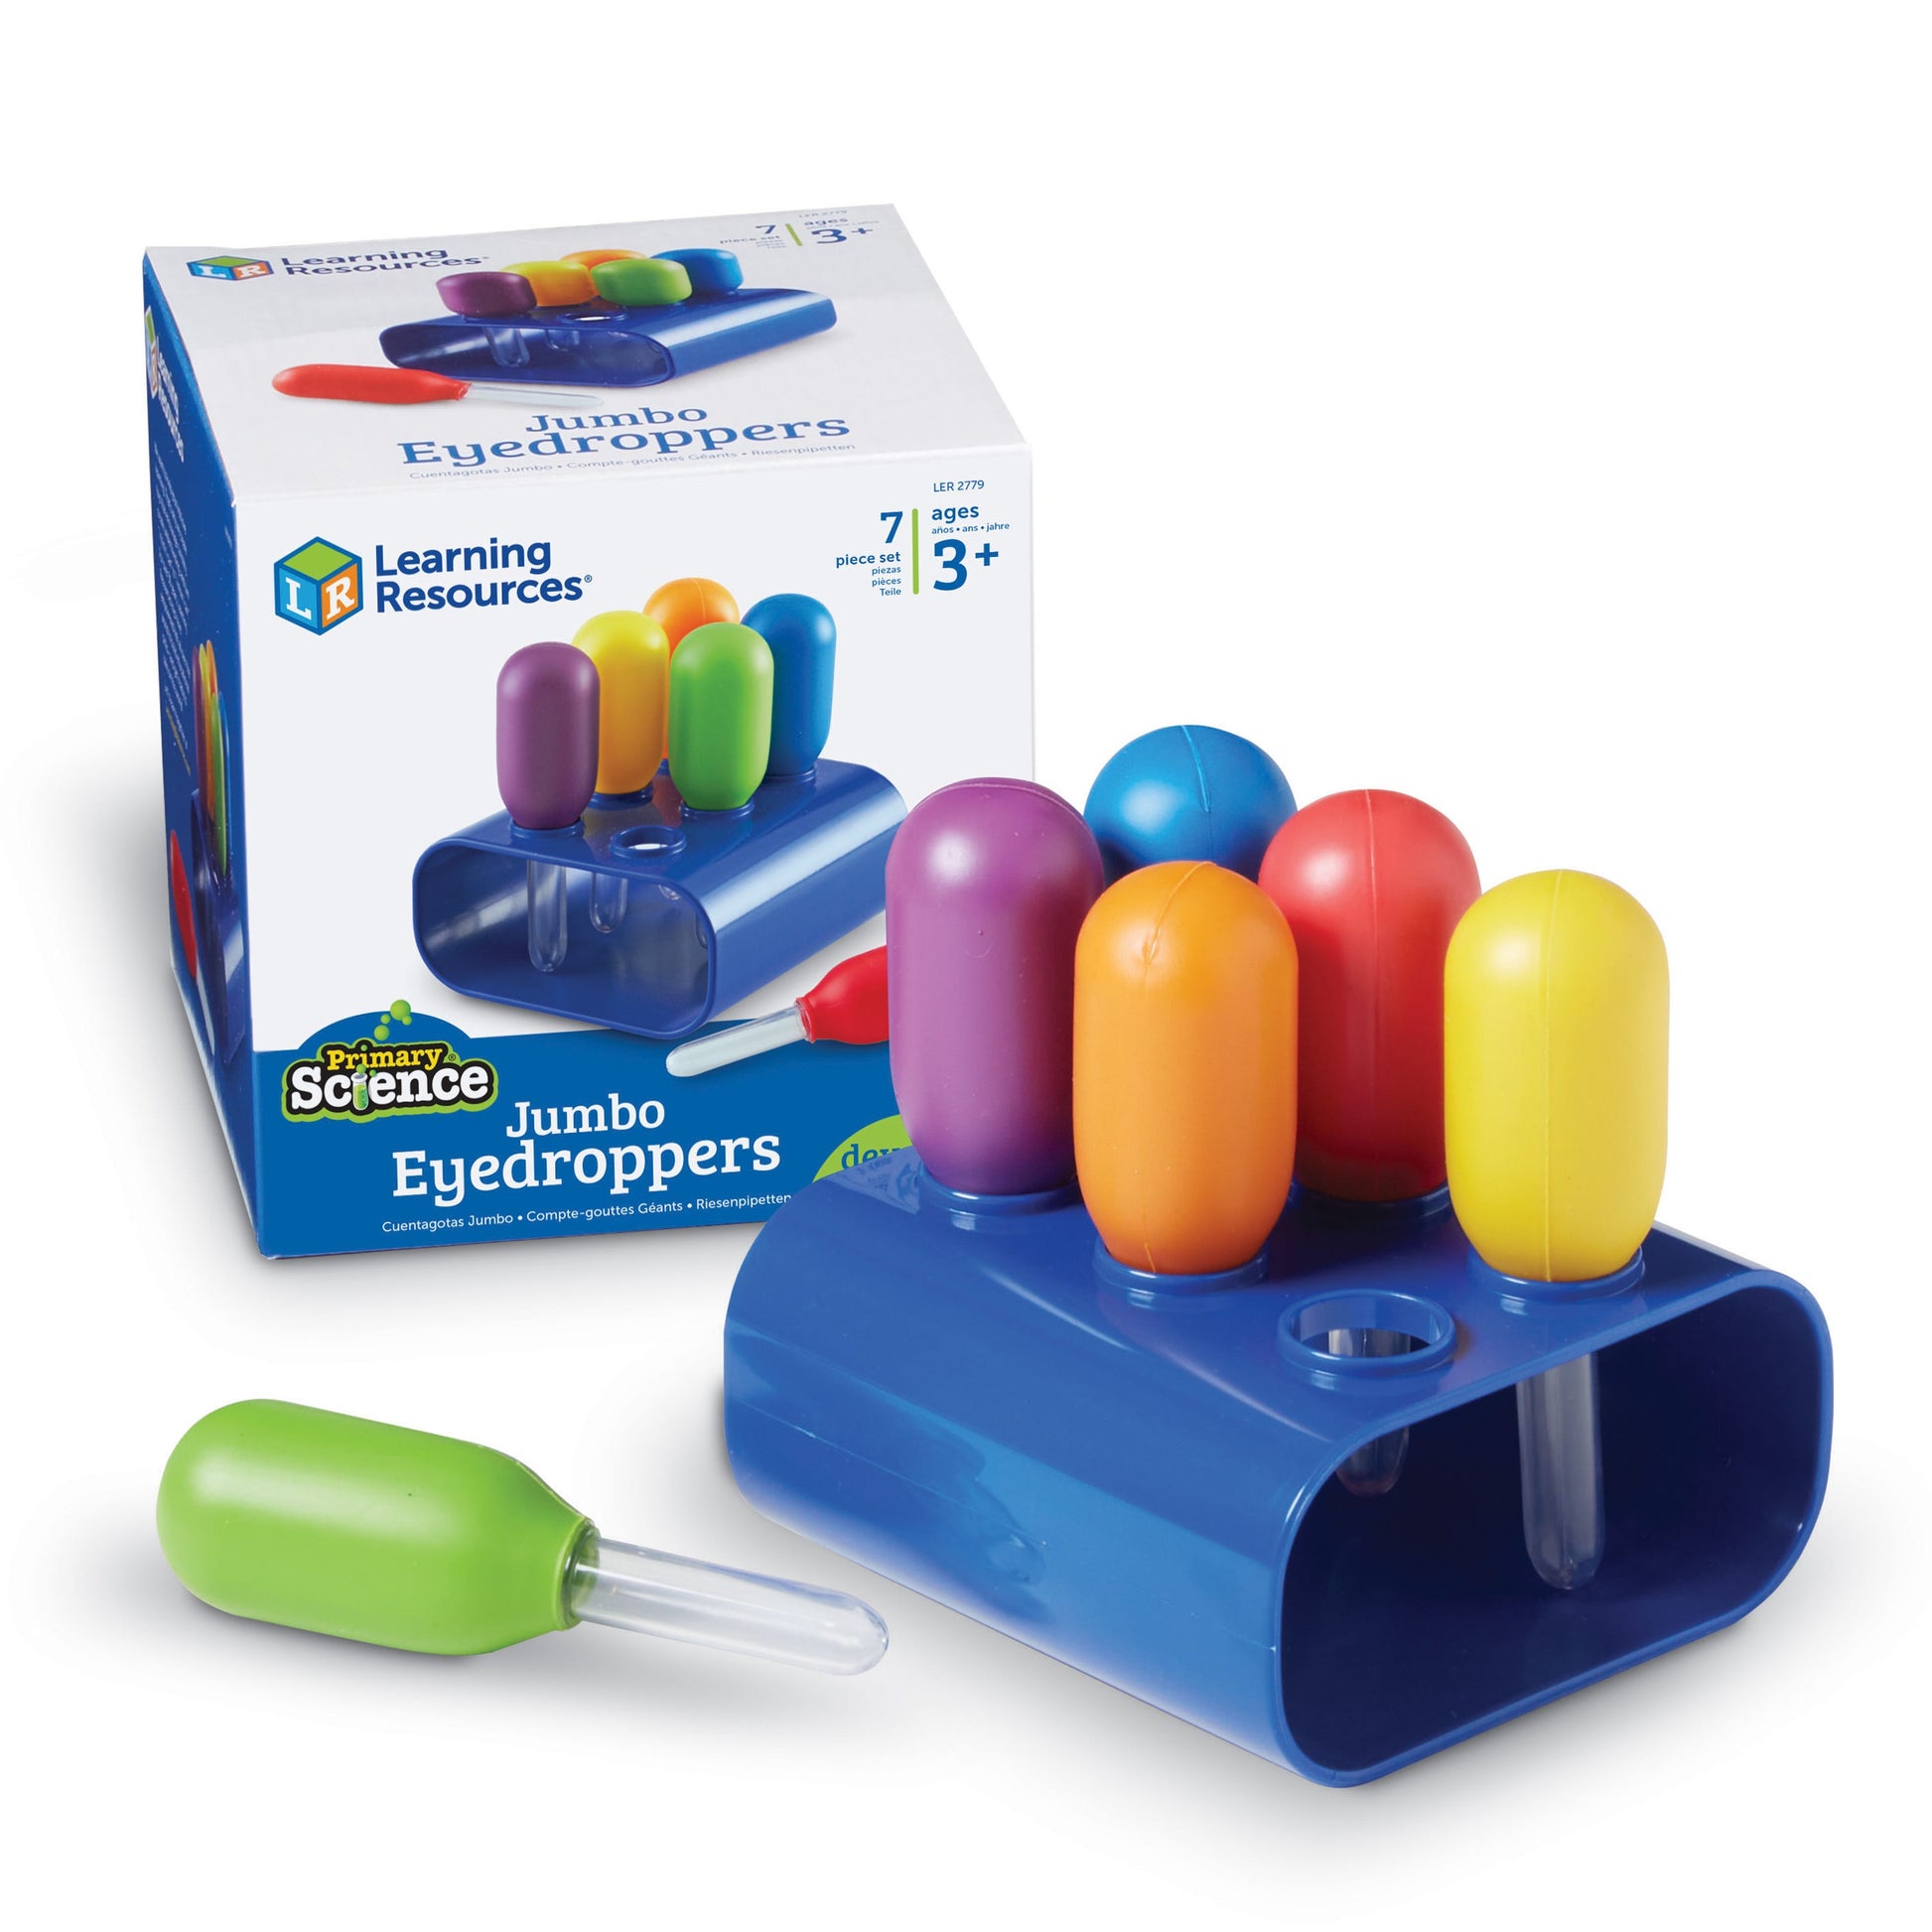 Primary Science® Jumbo Eyedroppers with Stand Pláneta